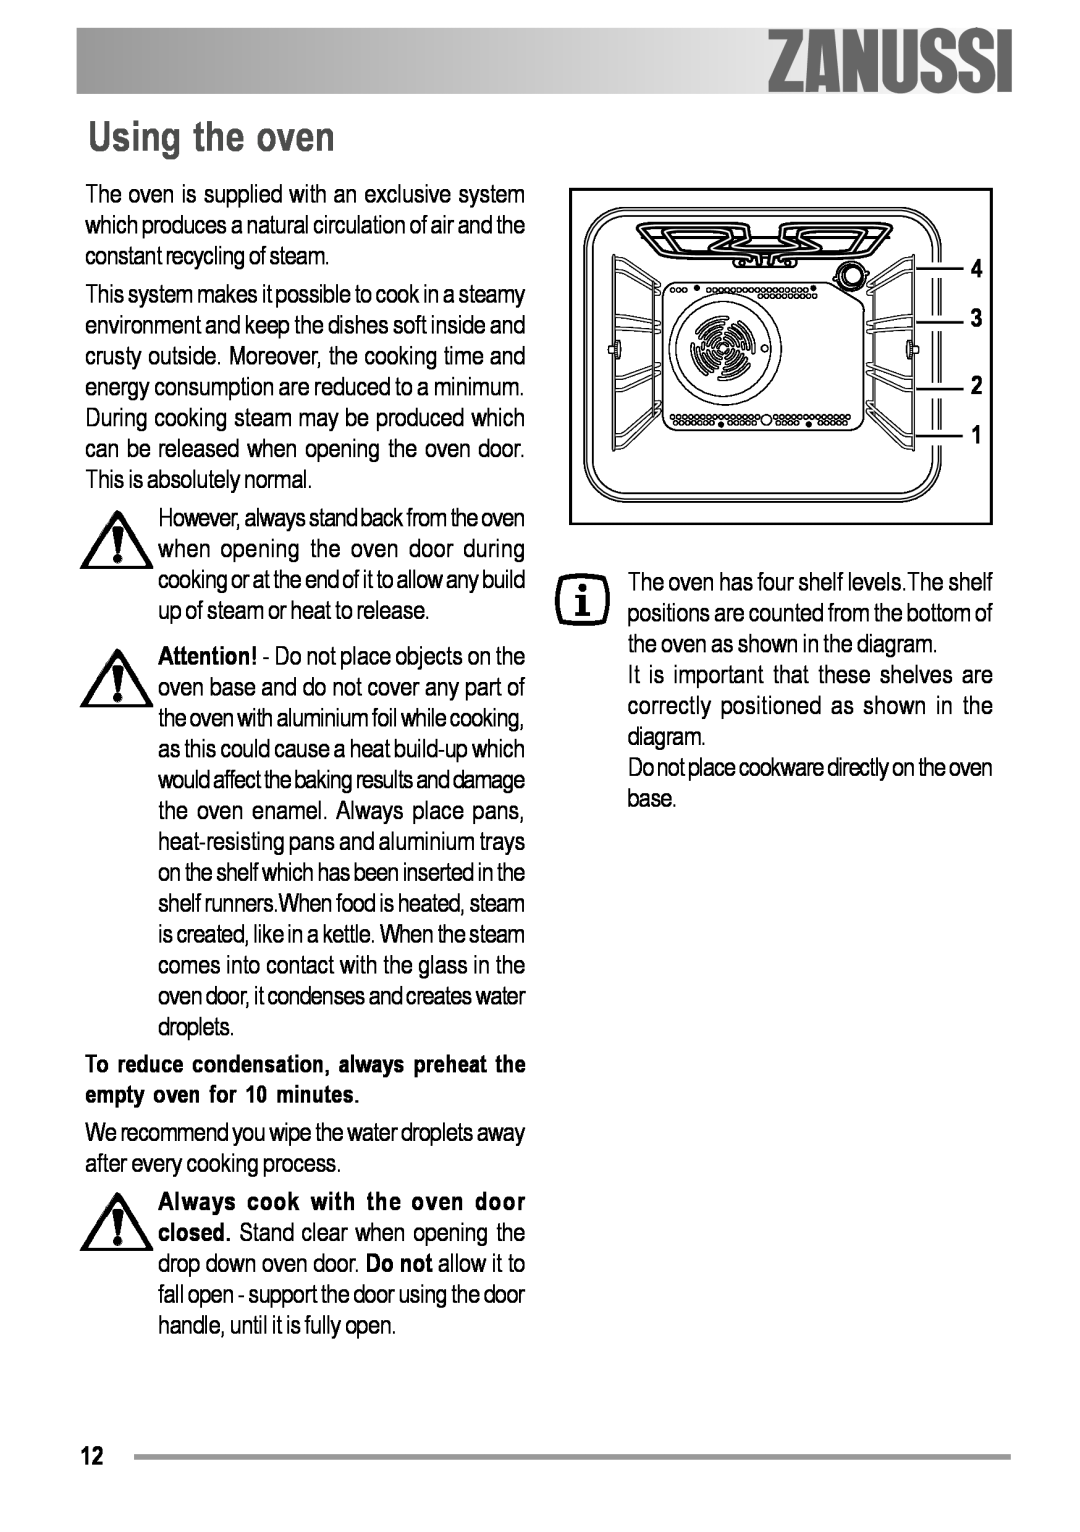 Zanussi ZOB 594 manual Using the oven, electrolux, Do not place cookware directly on the oven base 